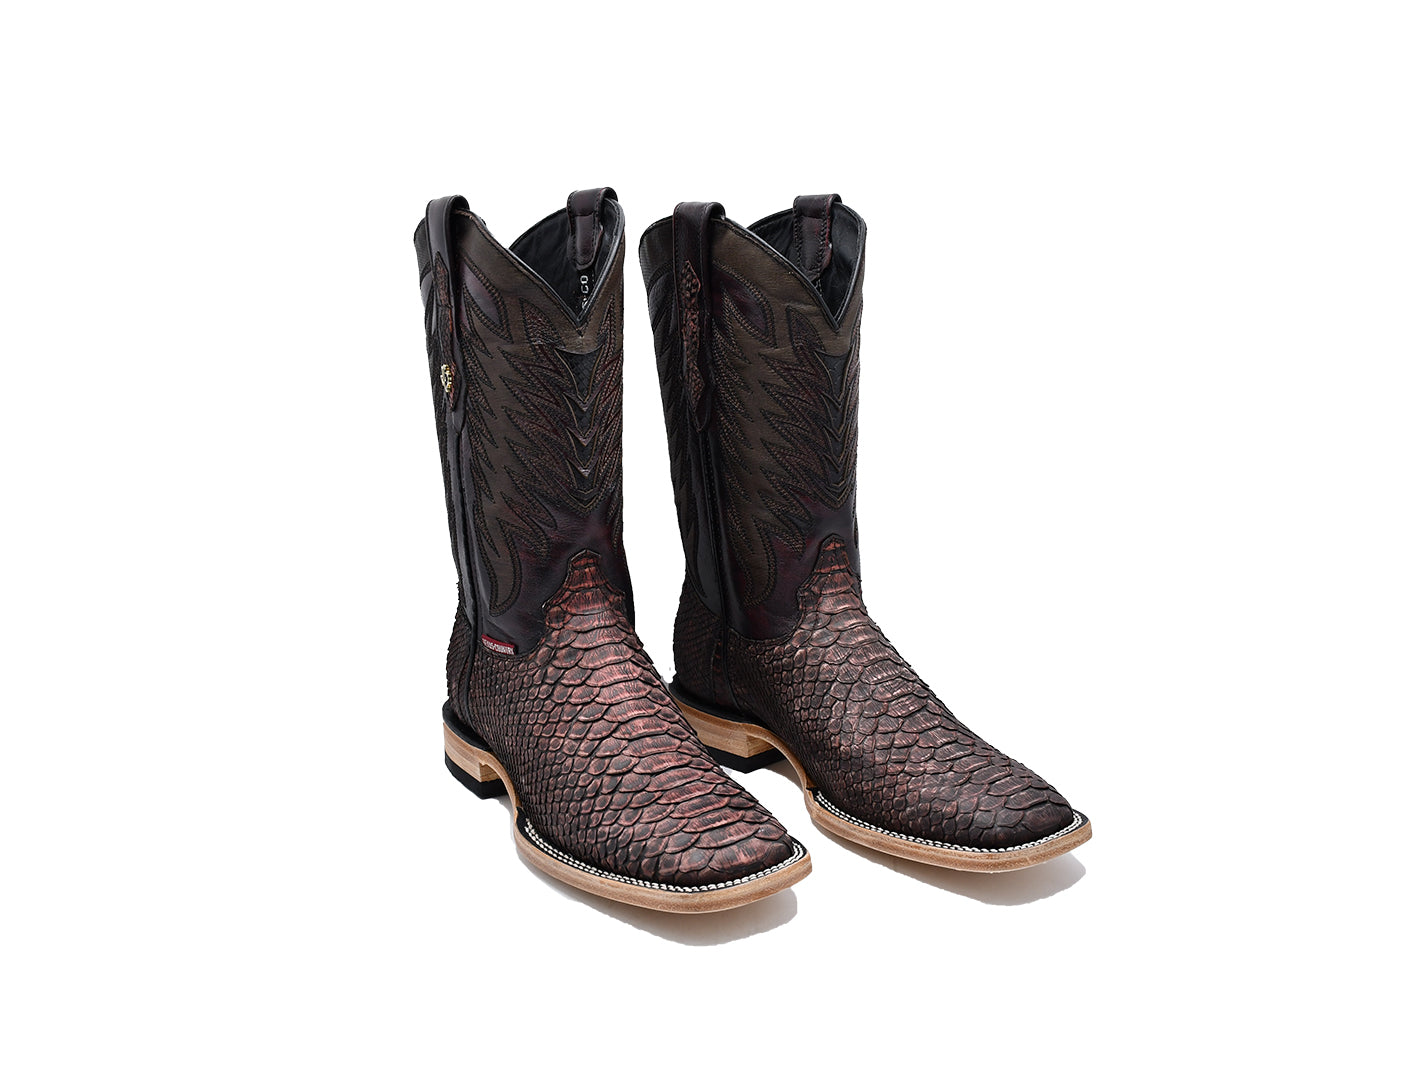 Mens Python Boot - Over 20 yrs of handmade boots. Come see our Texas Country Brand